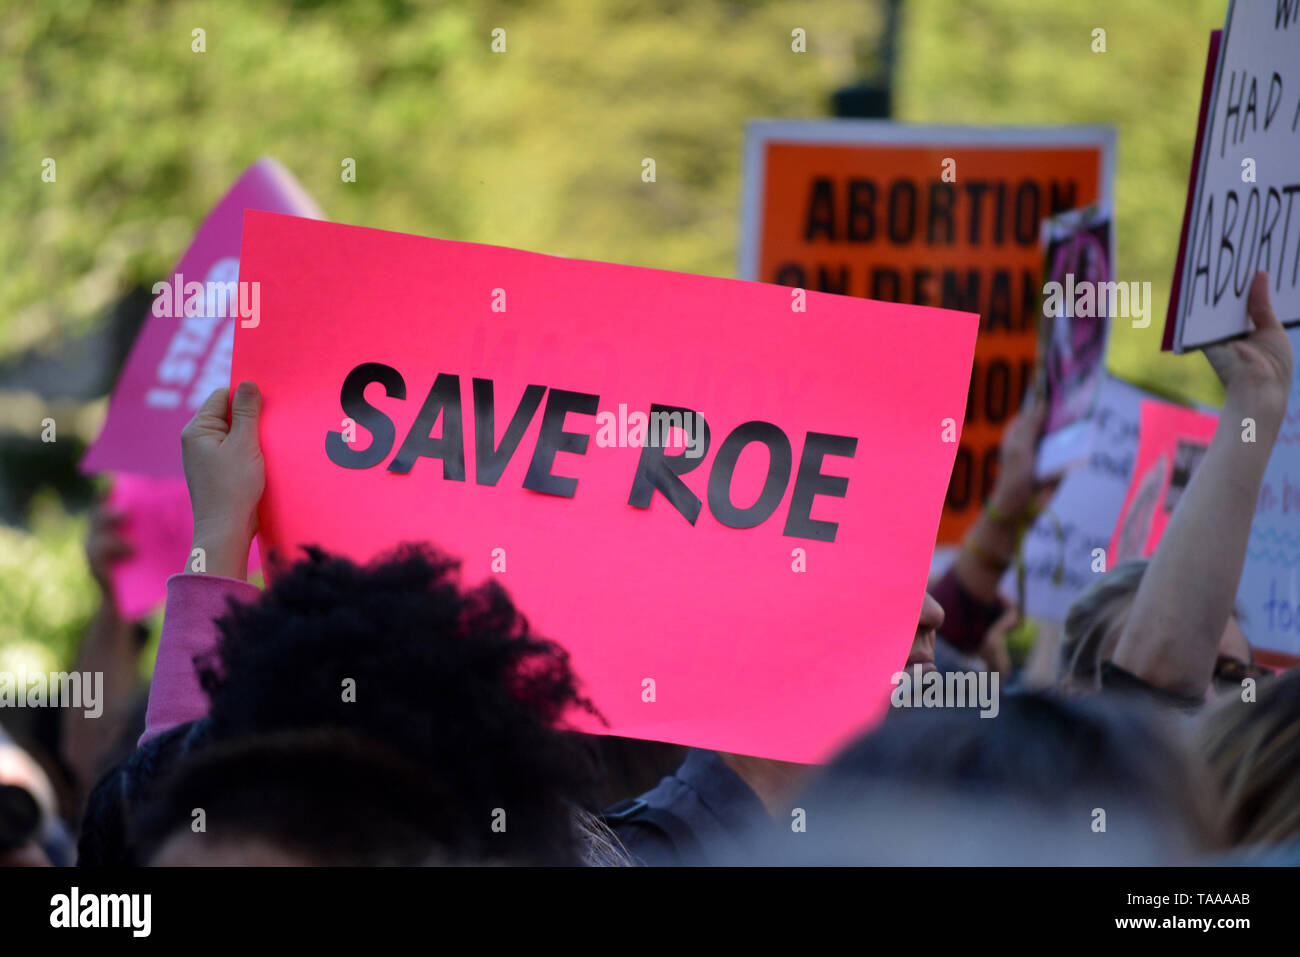 People in New York City protesting abortion bans sweeping across parts of the United States Stock Photo